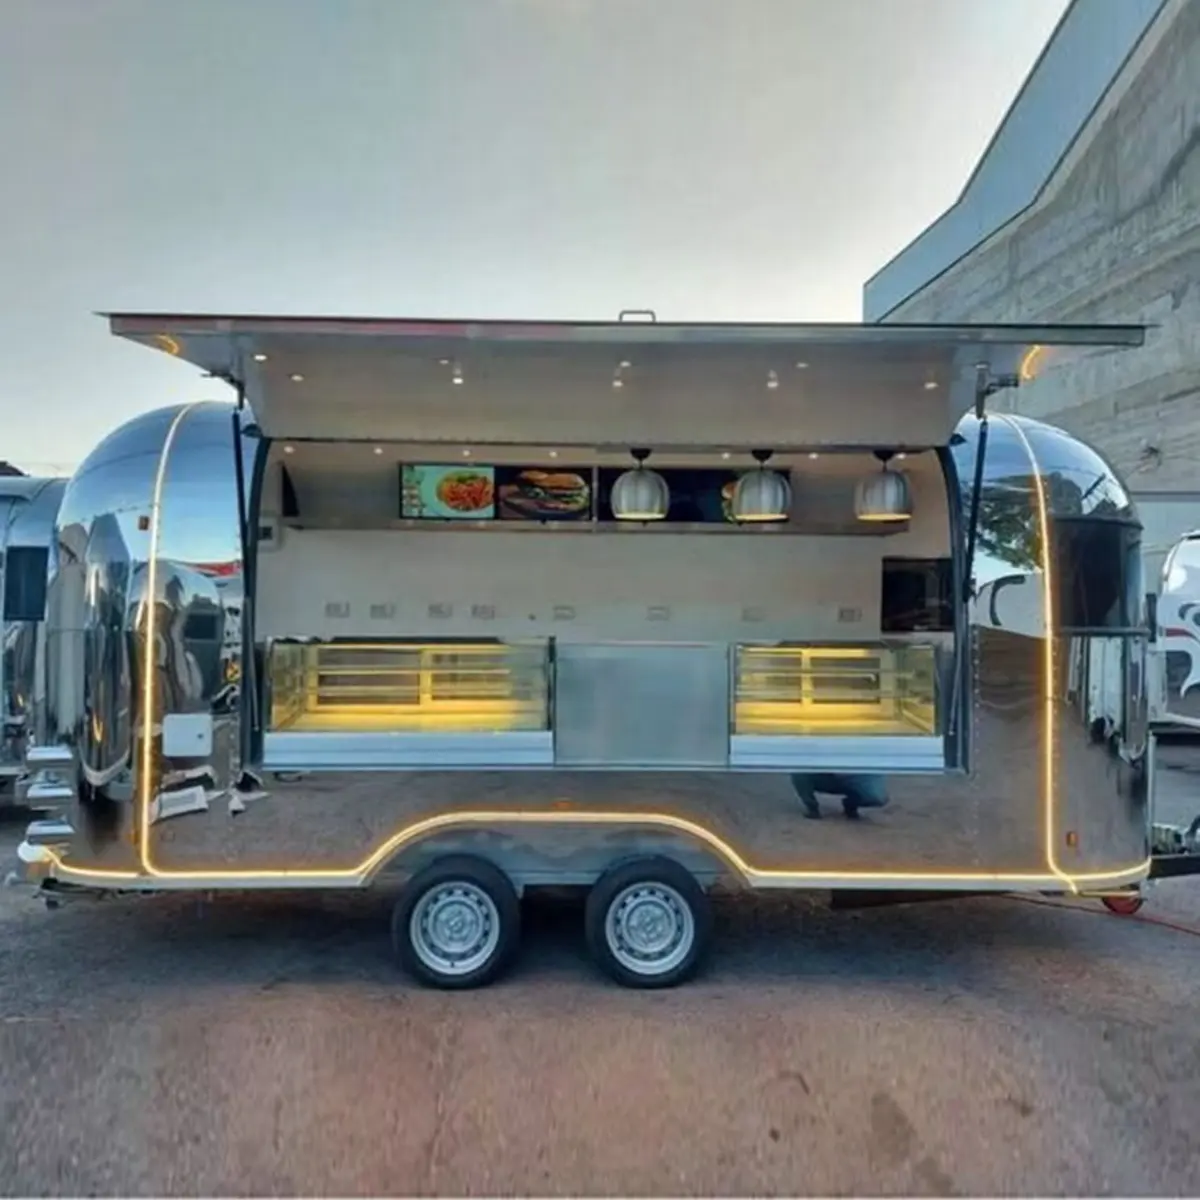 New Vintage Airstream Shaped Electric Mobile Van Street Food Truck Trailer for Fried Chicken Drink Ice Cream Sweets Bakery